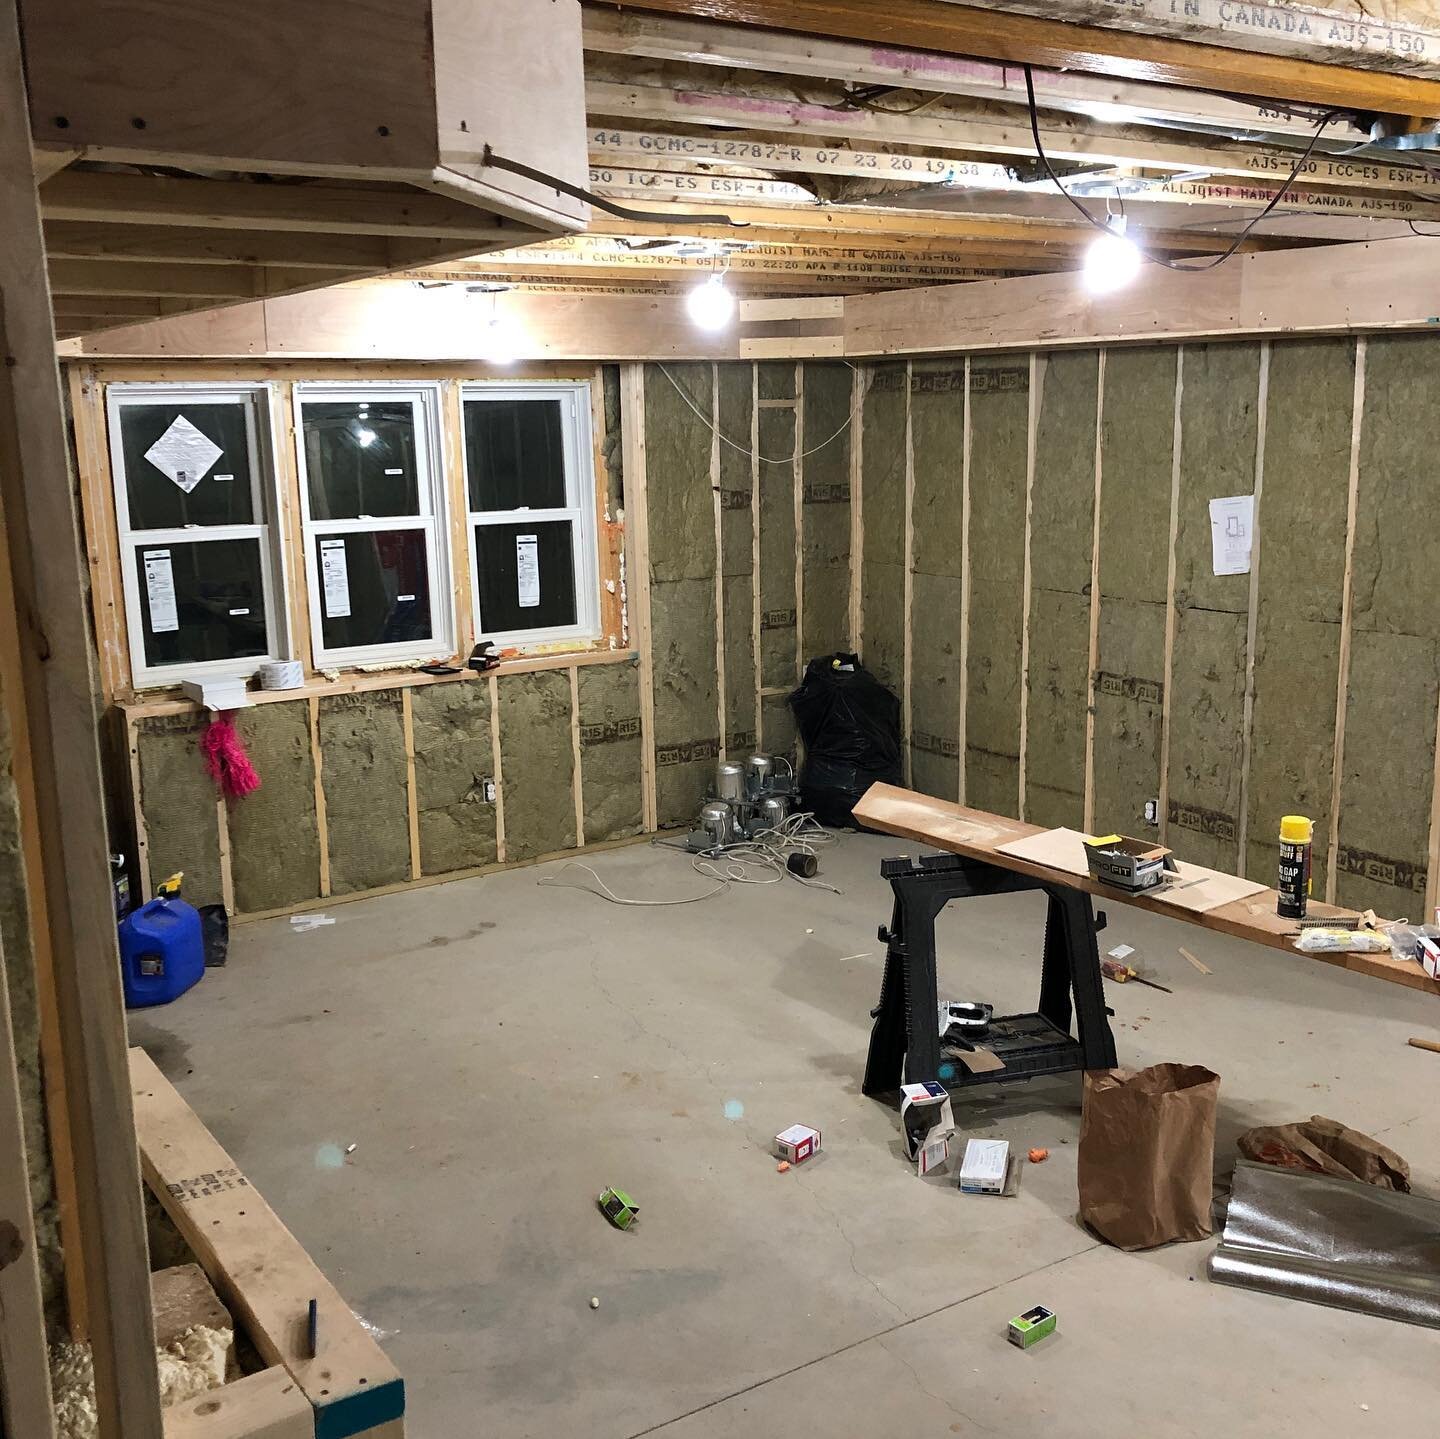 Finishing a custom basement with tray ceiling and lots of doors / windows added.  This basement is automated with an intercom and video system to the main floor.  Of course it will have custom indoor audio, lighting, etc.  Drywall starting soon!